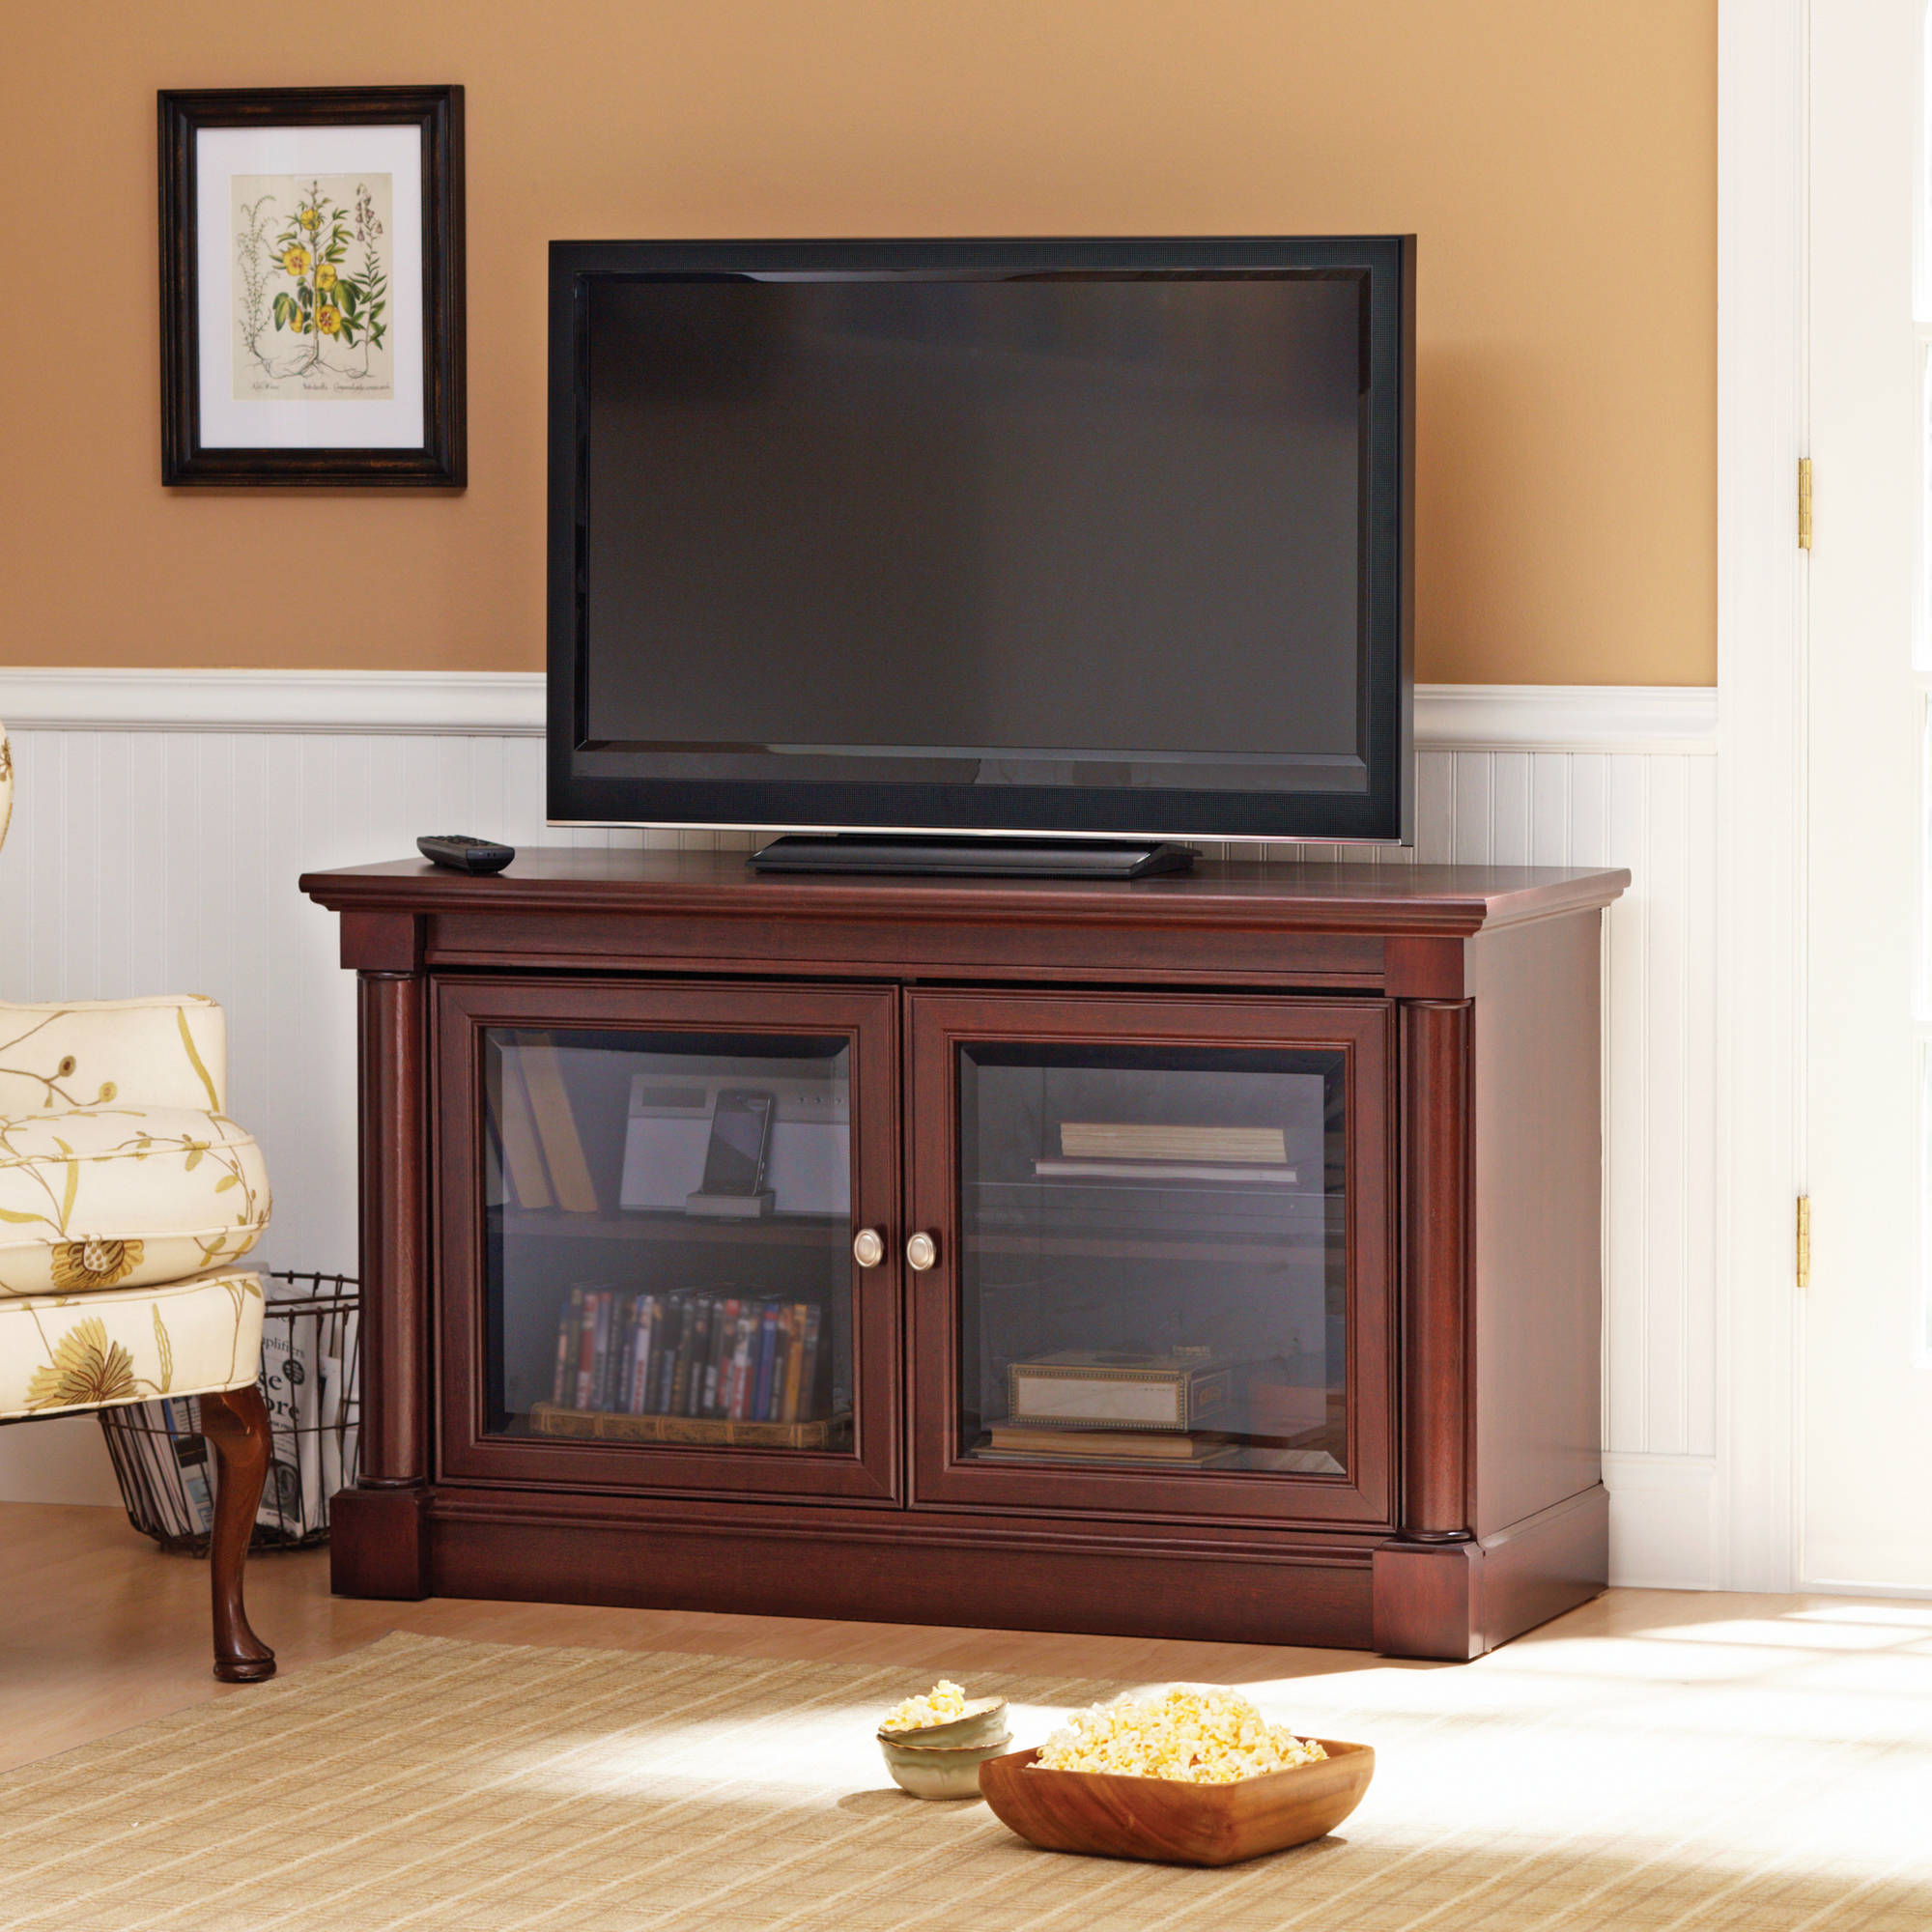 Better Homes And Gardens Ashwood Road Cherry Tv Stand For Tvs Up To 47